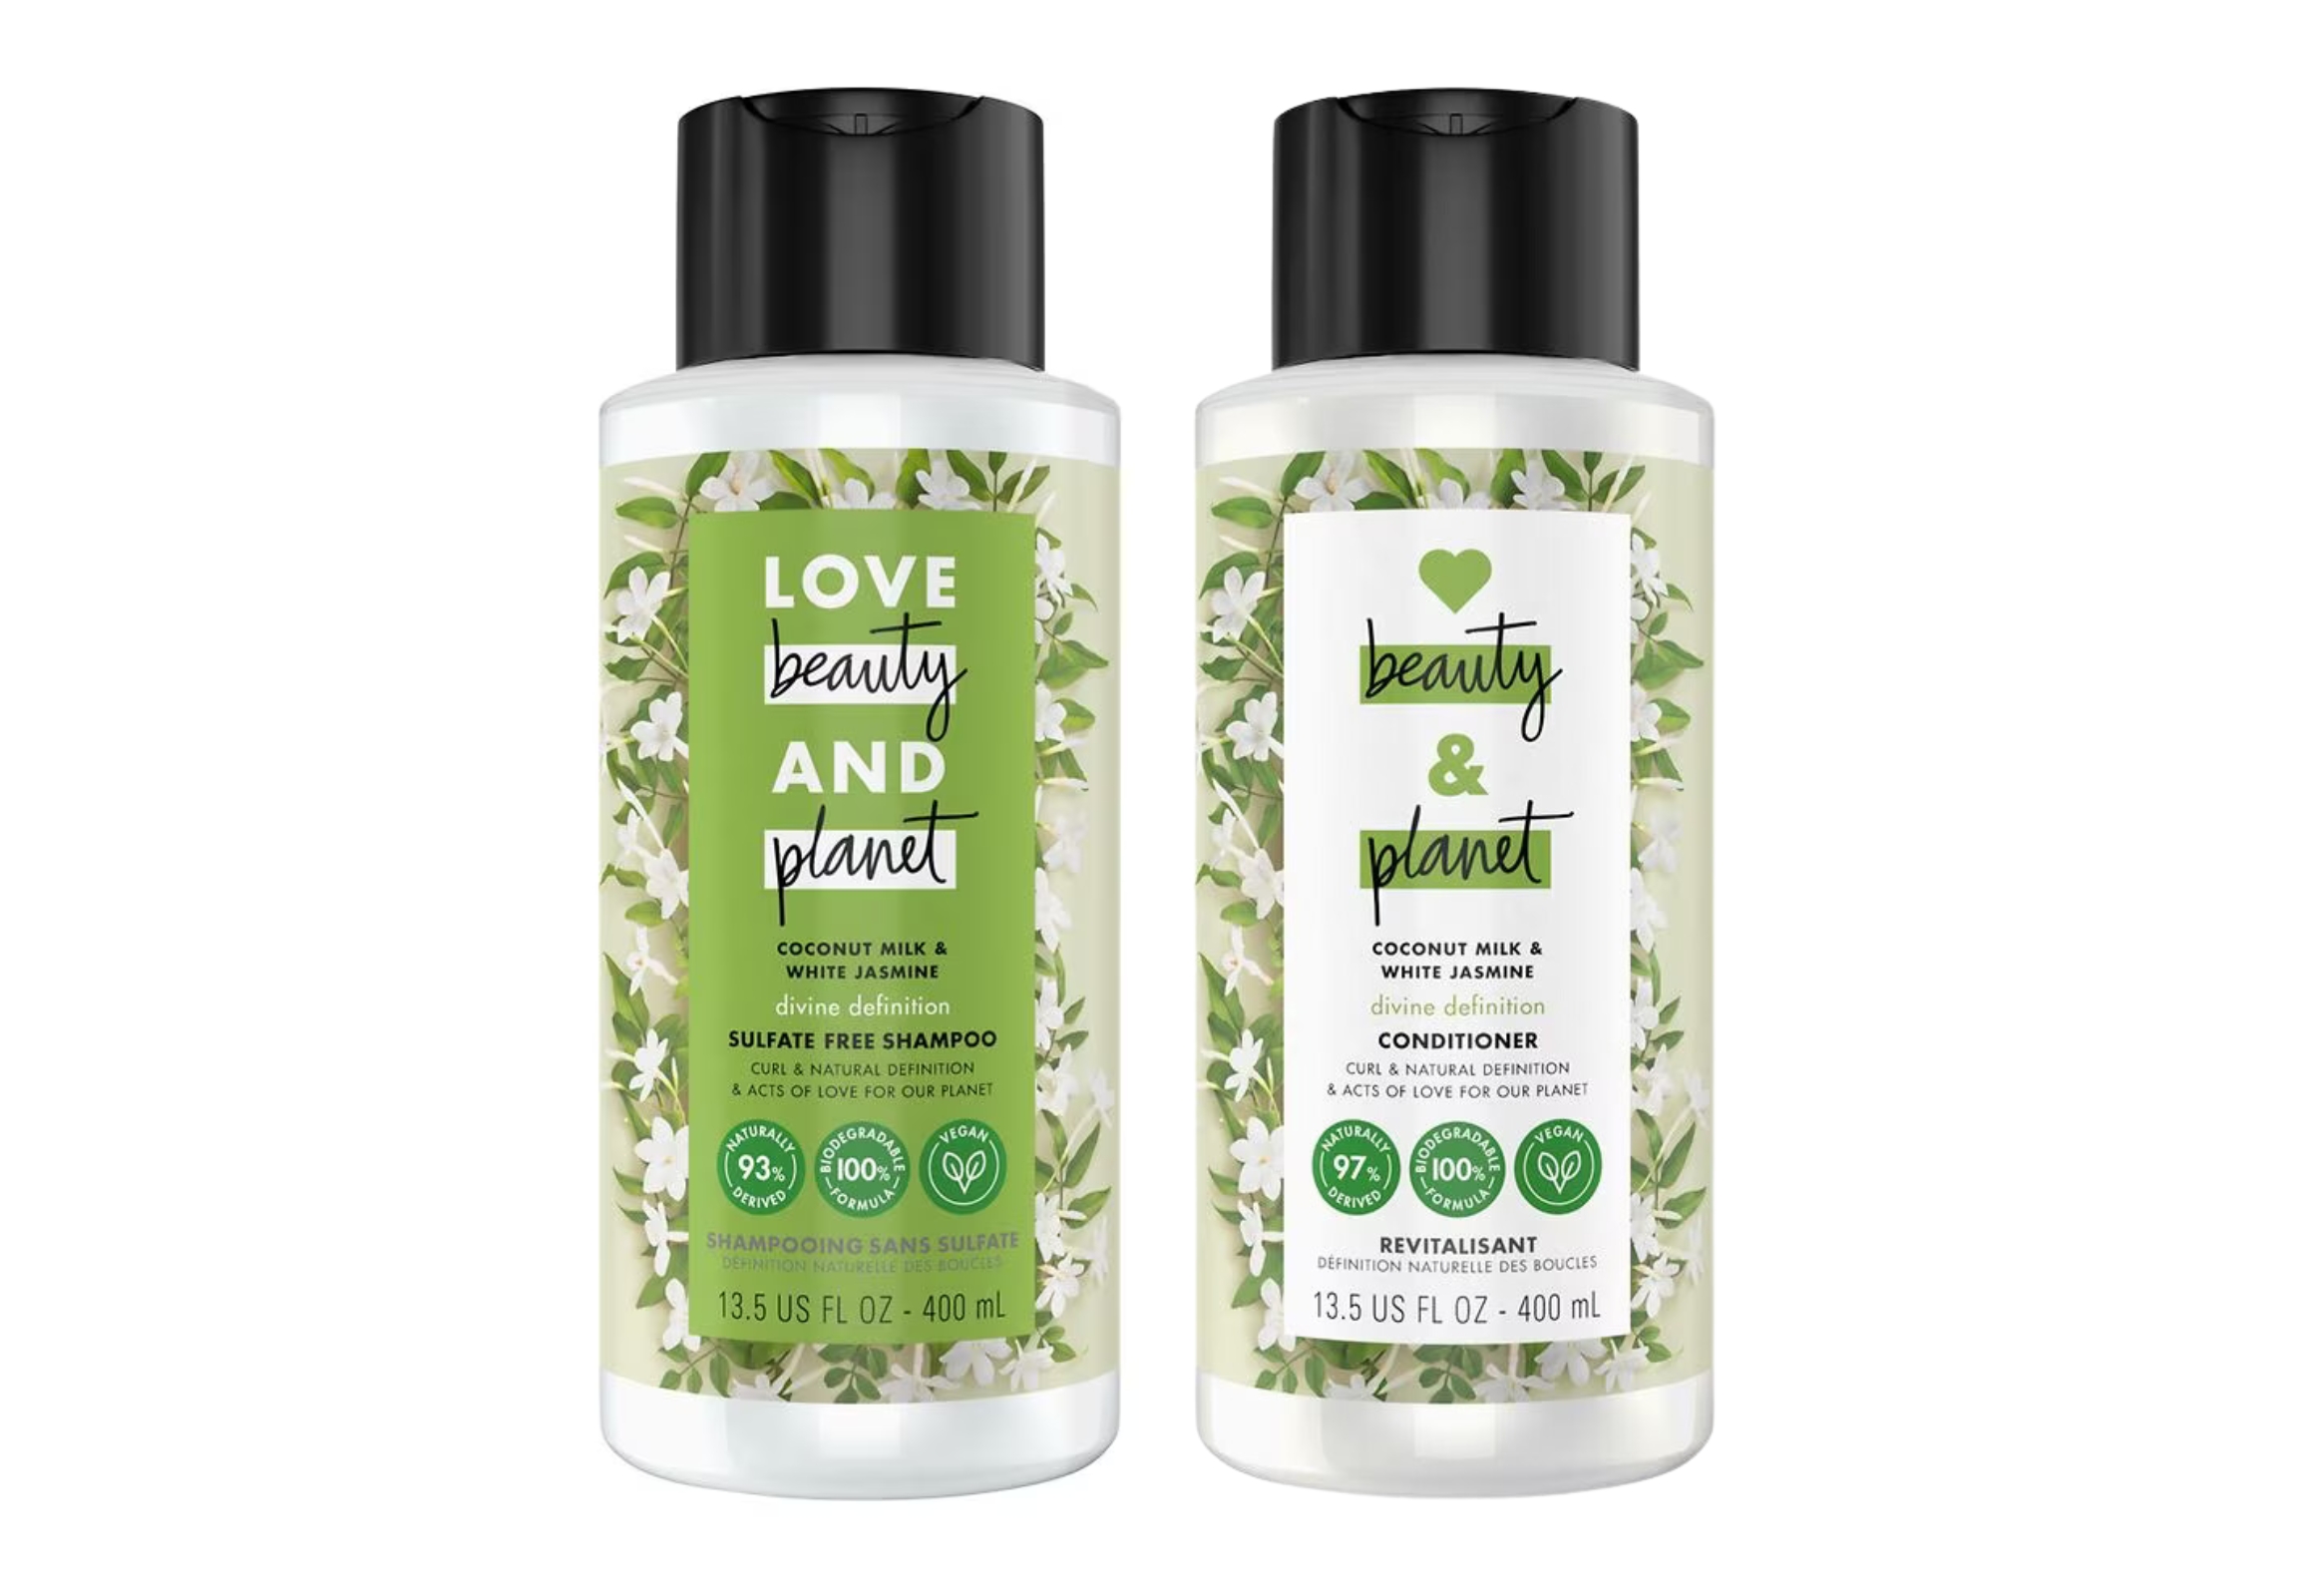 Love Beauty and Planet Hair Care